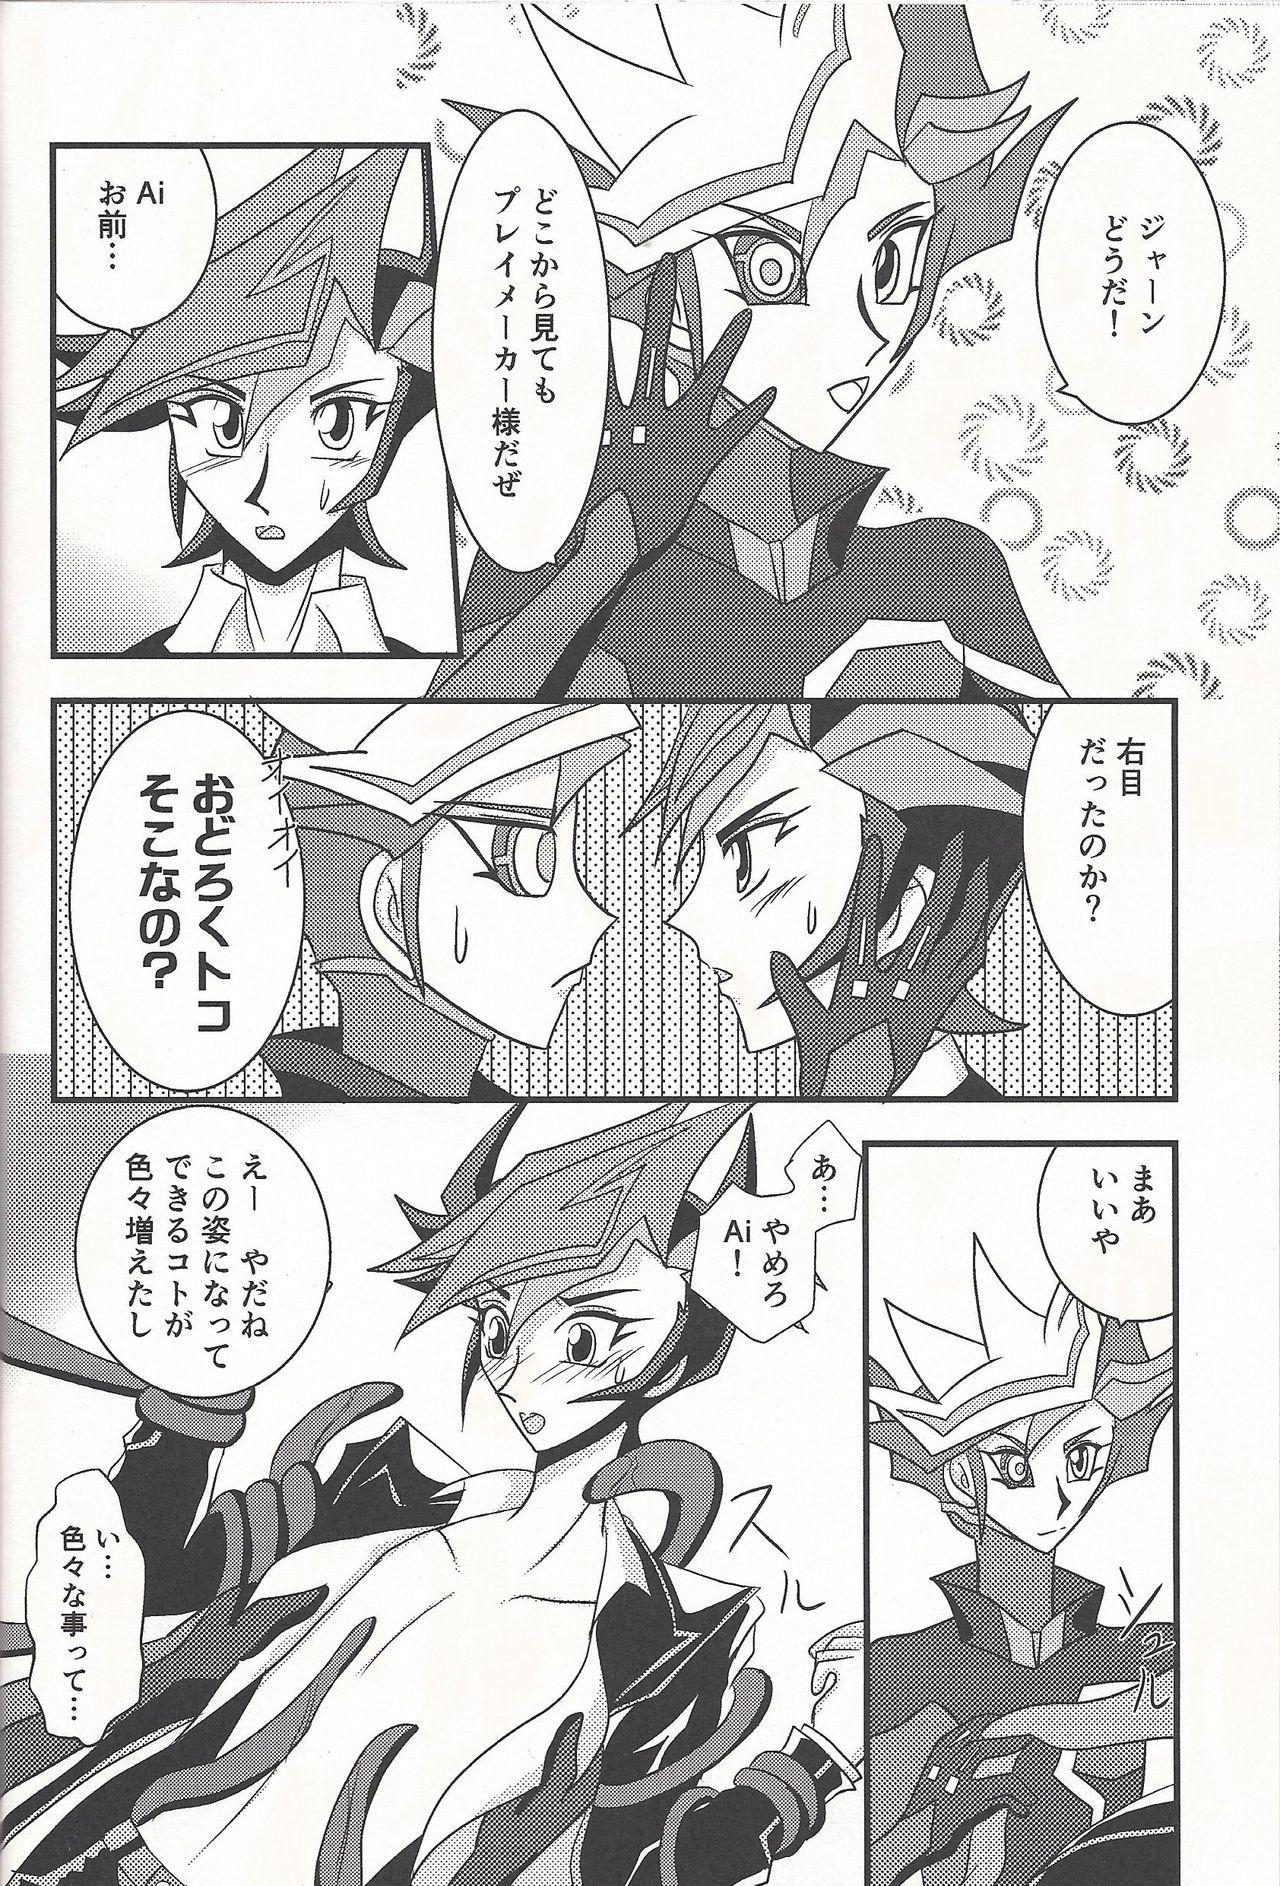 Girlfriends Mirrors gate - Yu gi oh vrains Juicy - Page 11